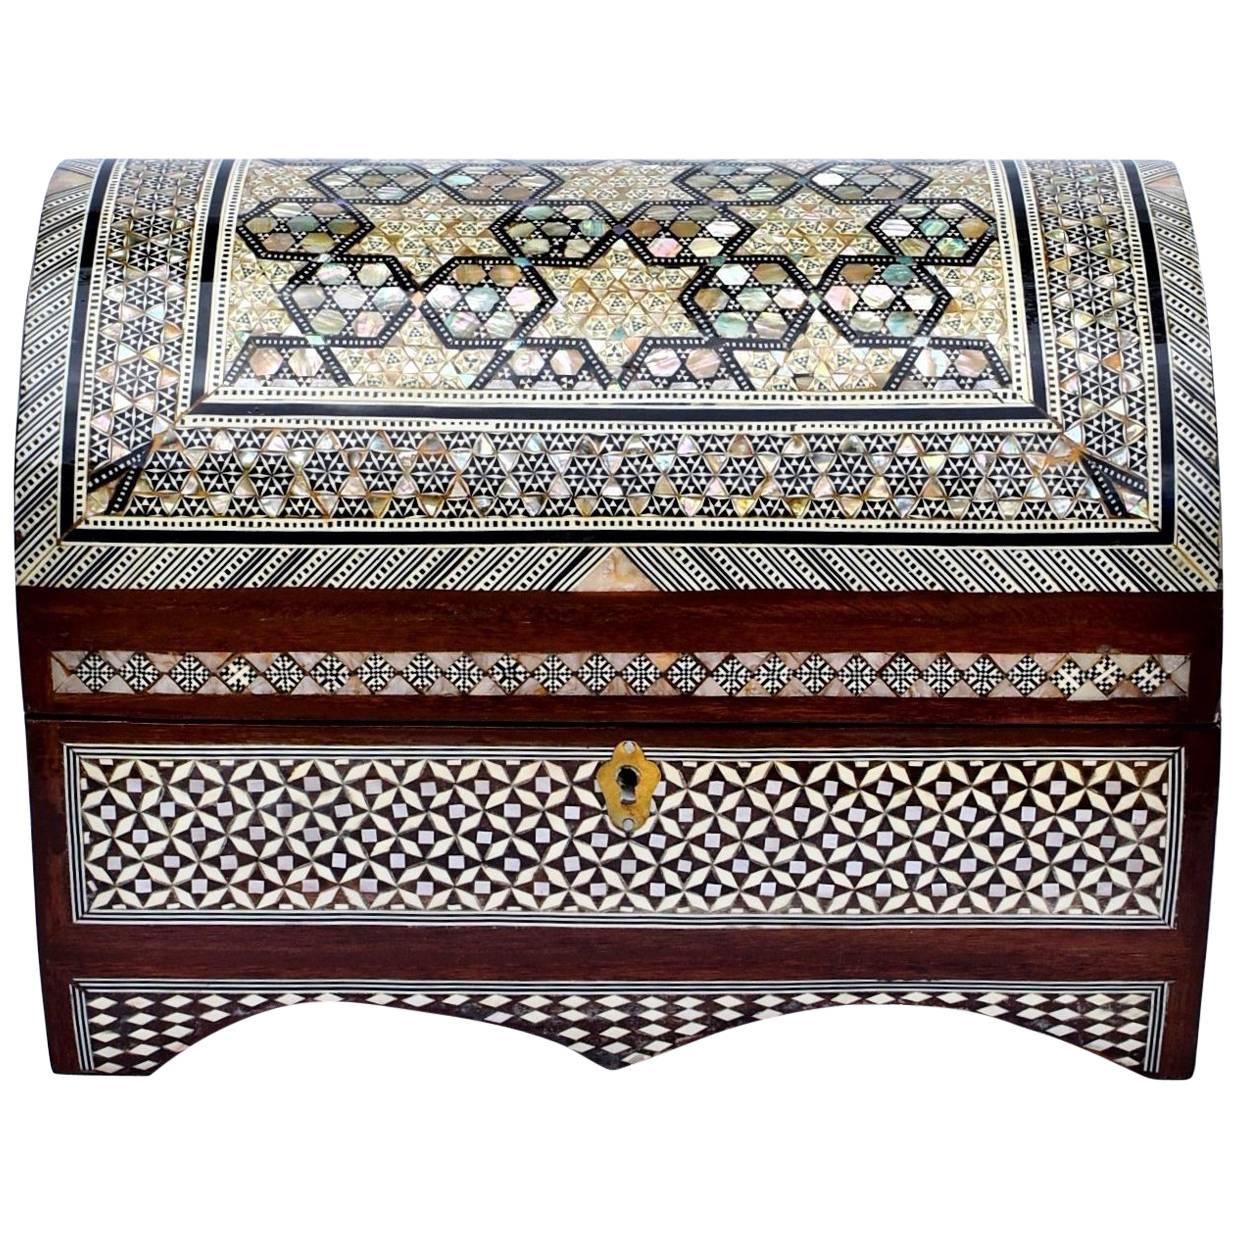 Mother-of-pearl Inlaid Dome Jewelry Box